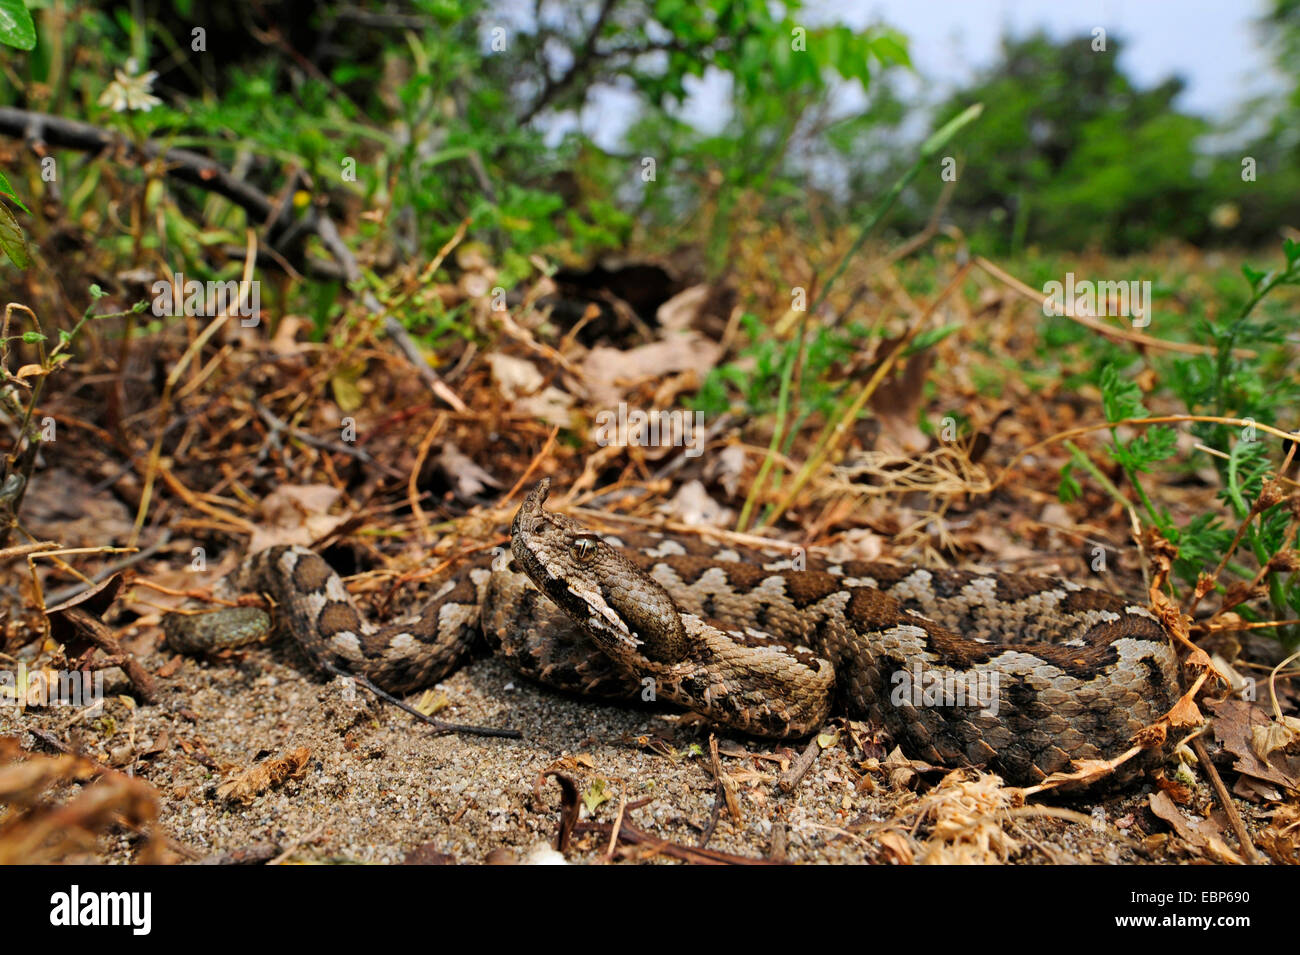 Nose-horned viper, Horned viper, Long-nosed viper (Vipera ammodytes), lying on the ground, Greece, Macedonia Stock Photo